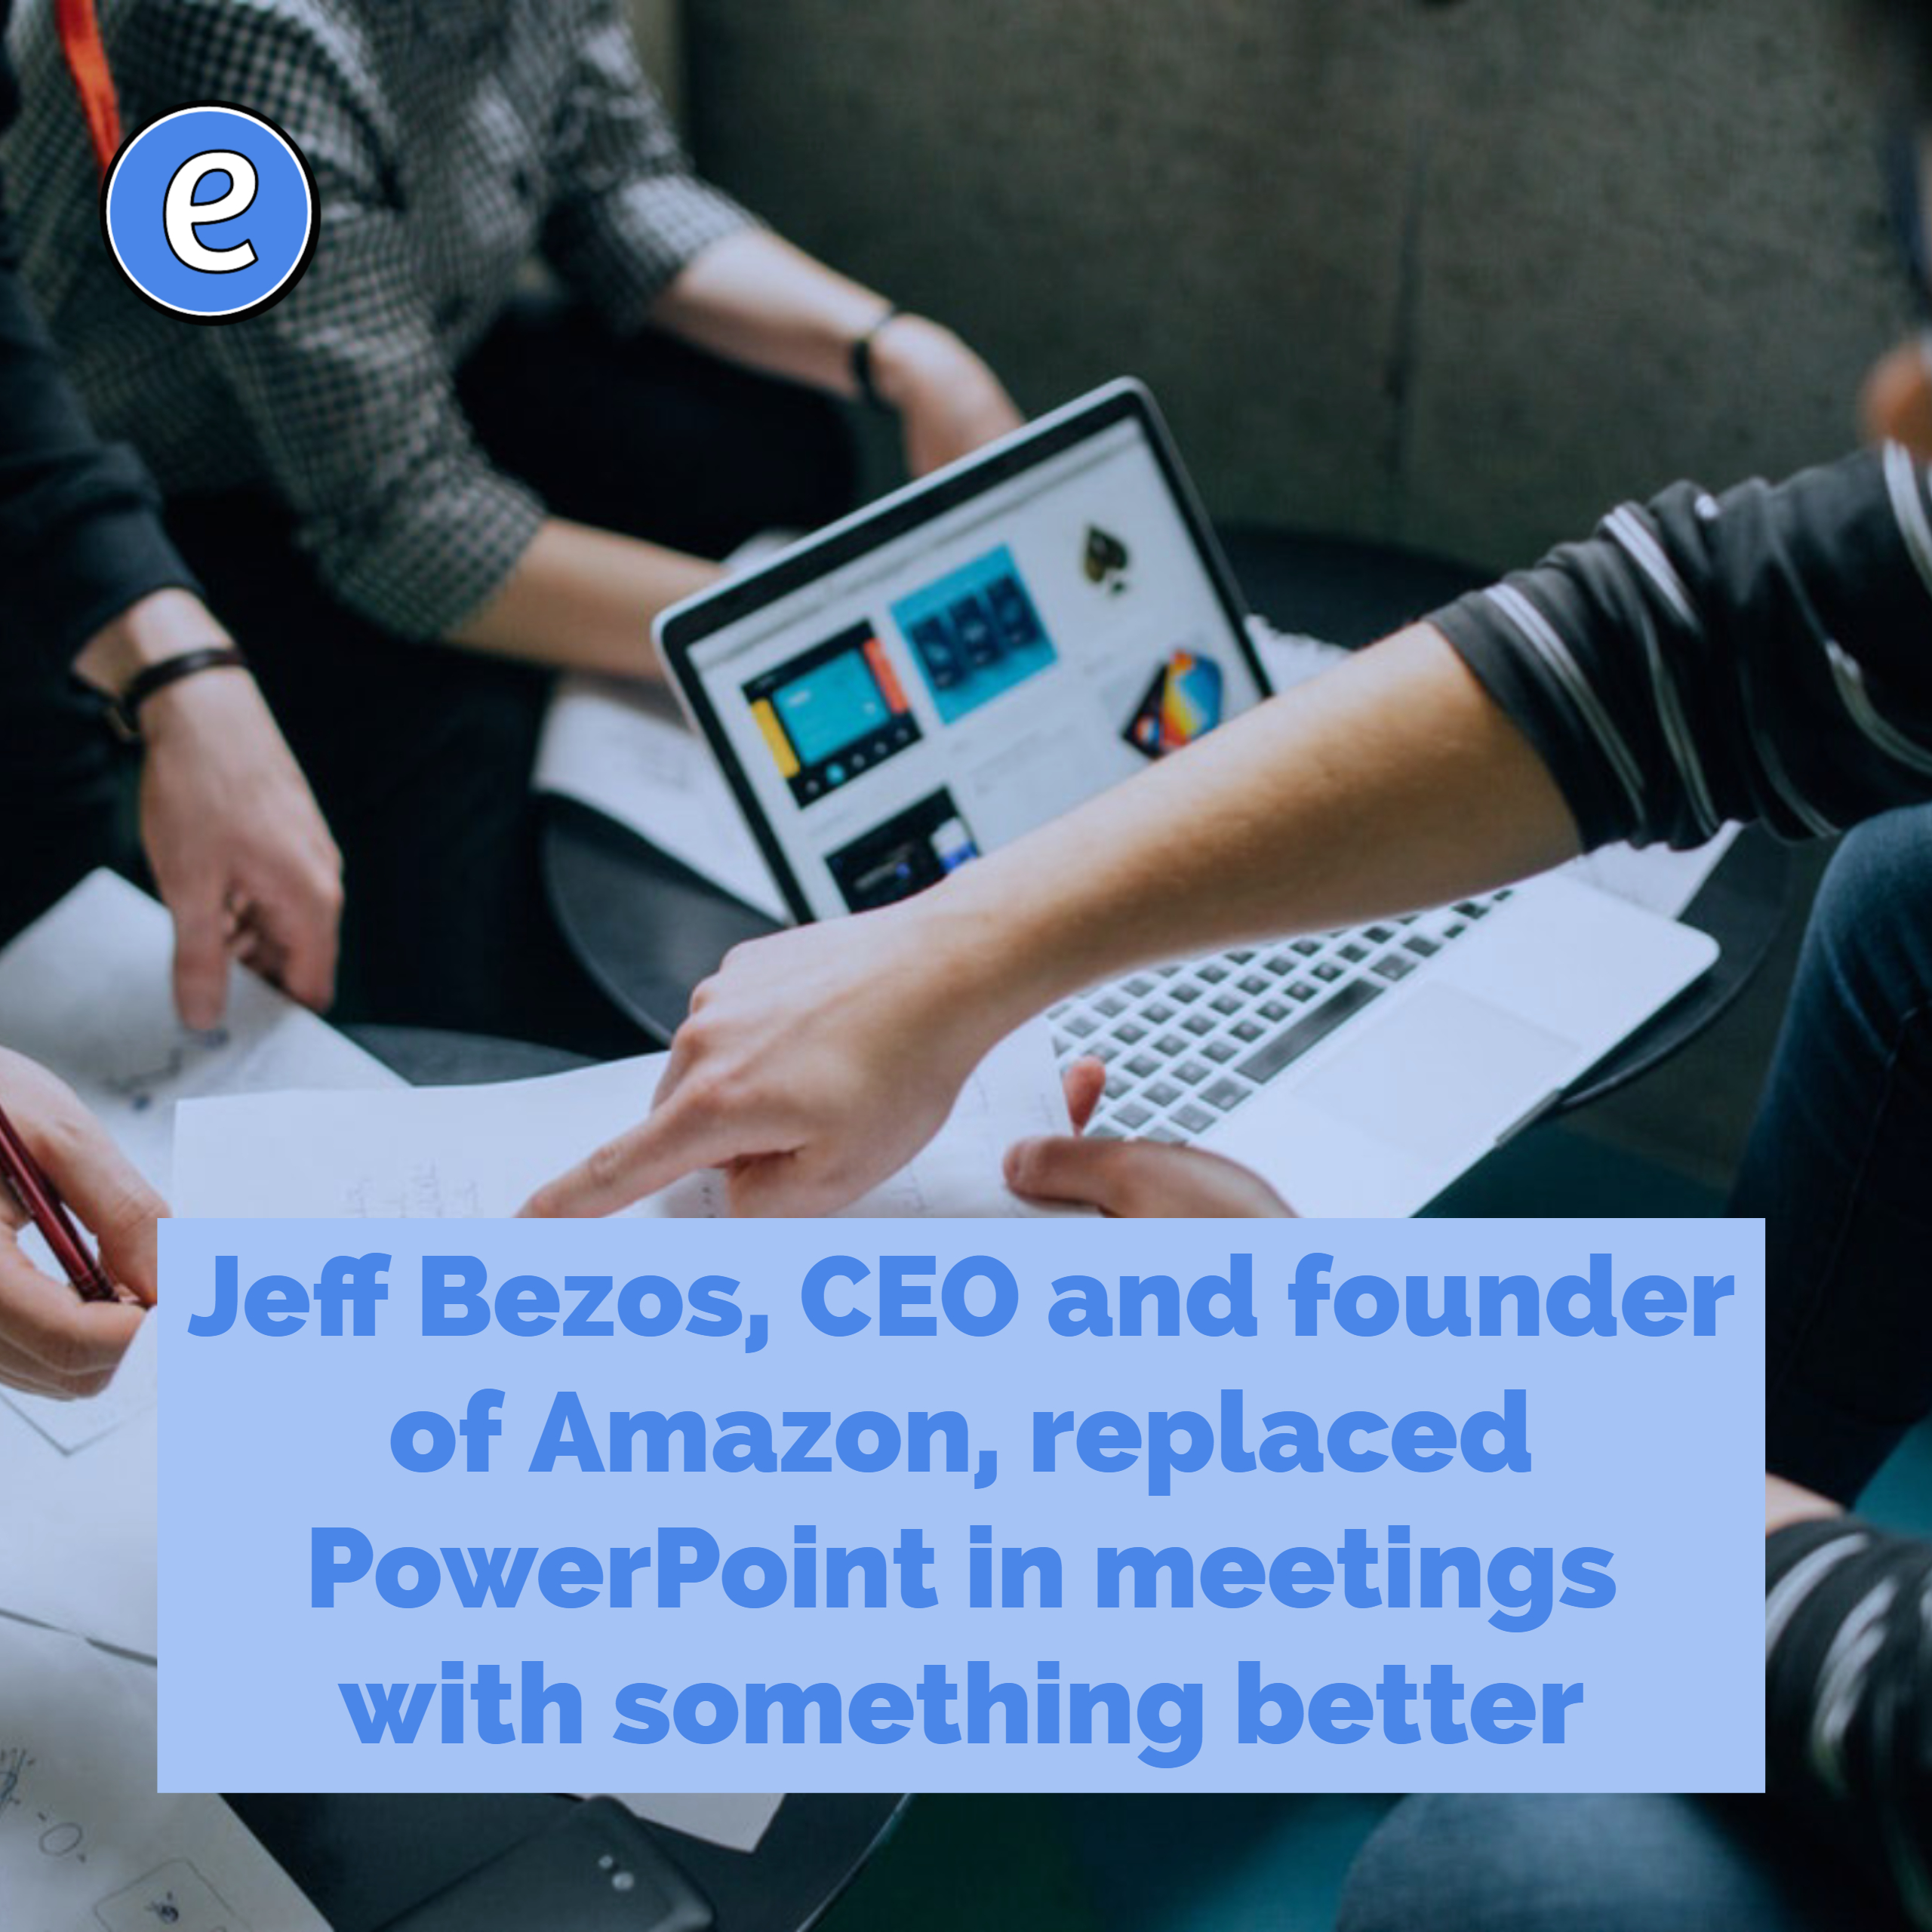 Jeff Bezos, CEO and founder of Amazon, replaced PowerPoint in meetings with something better